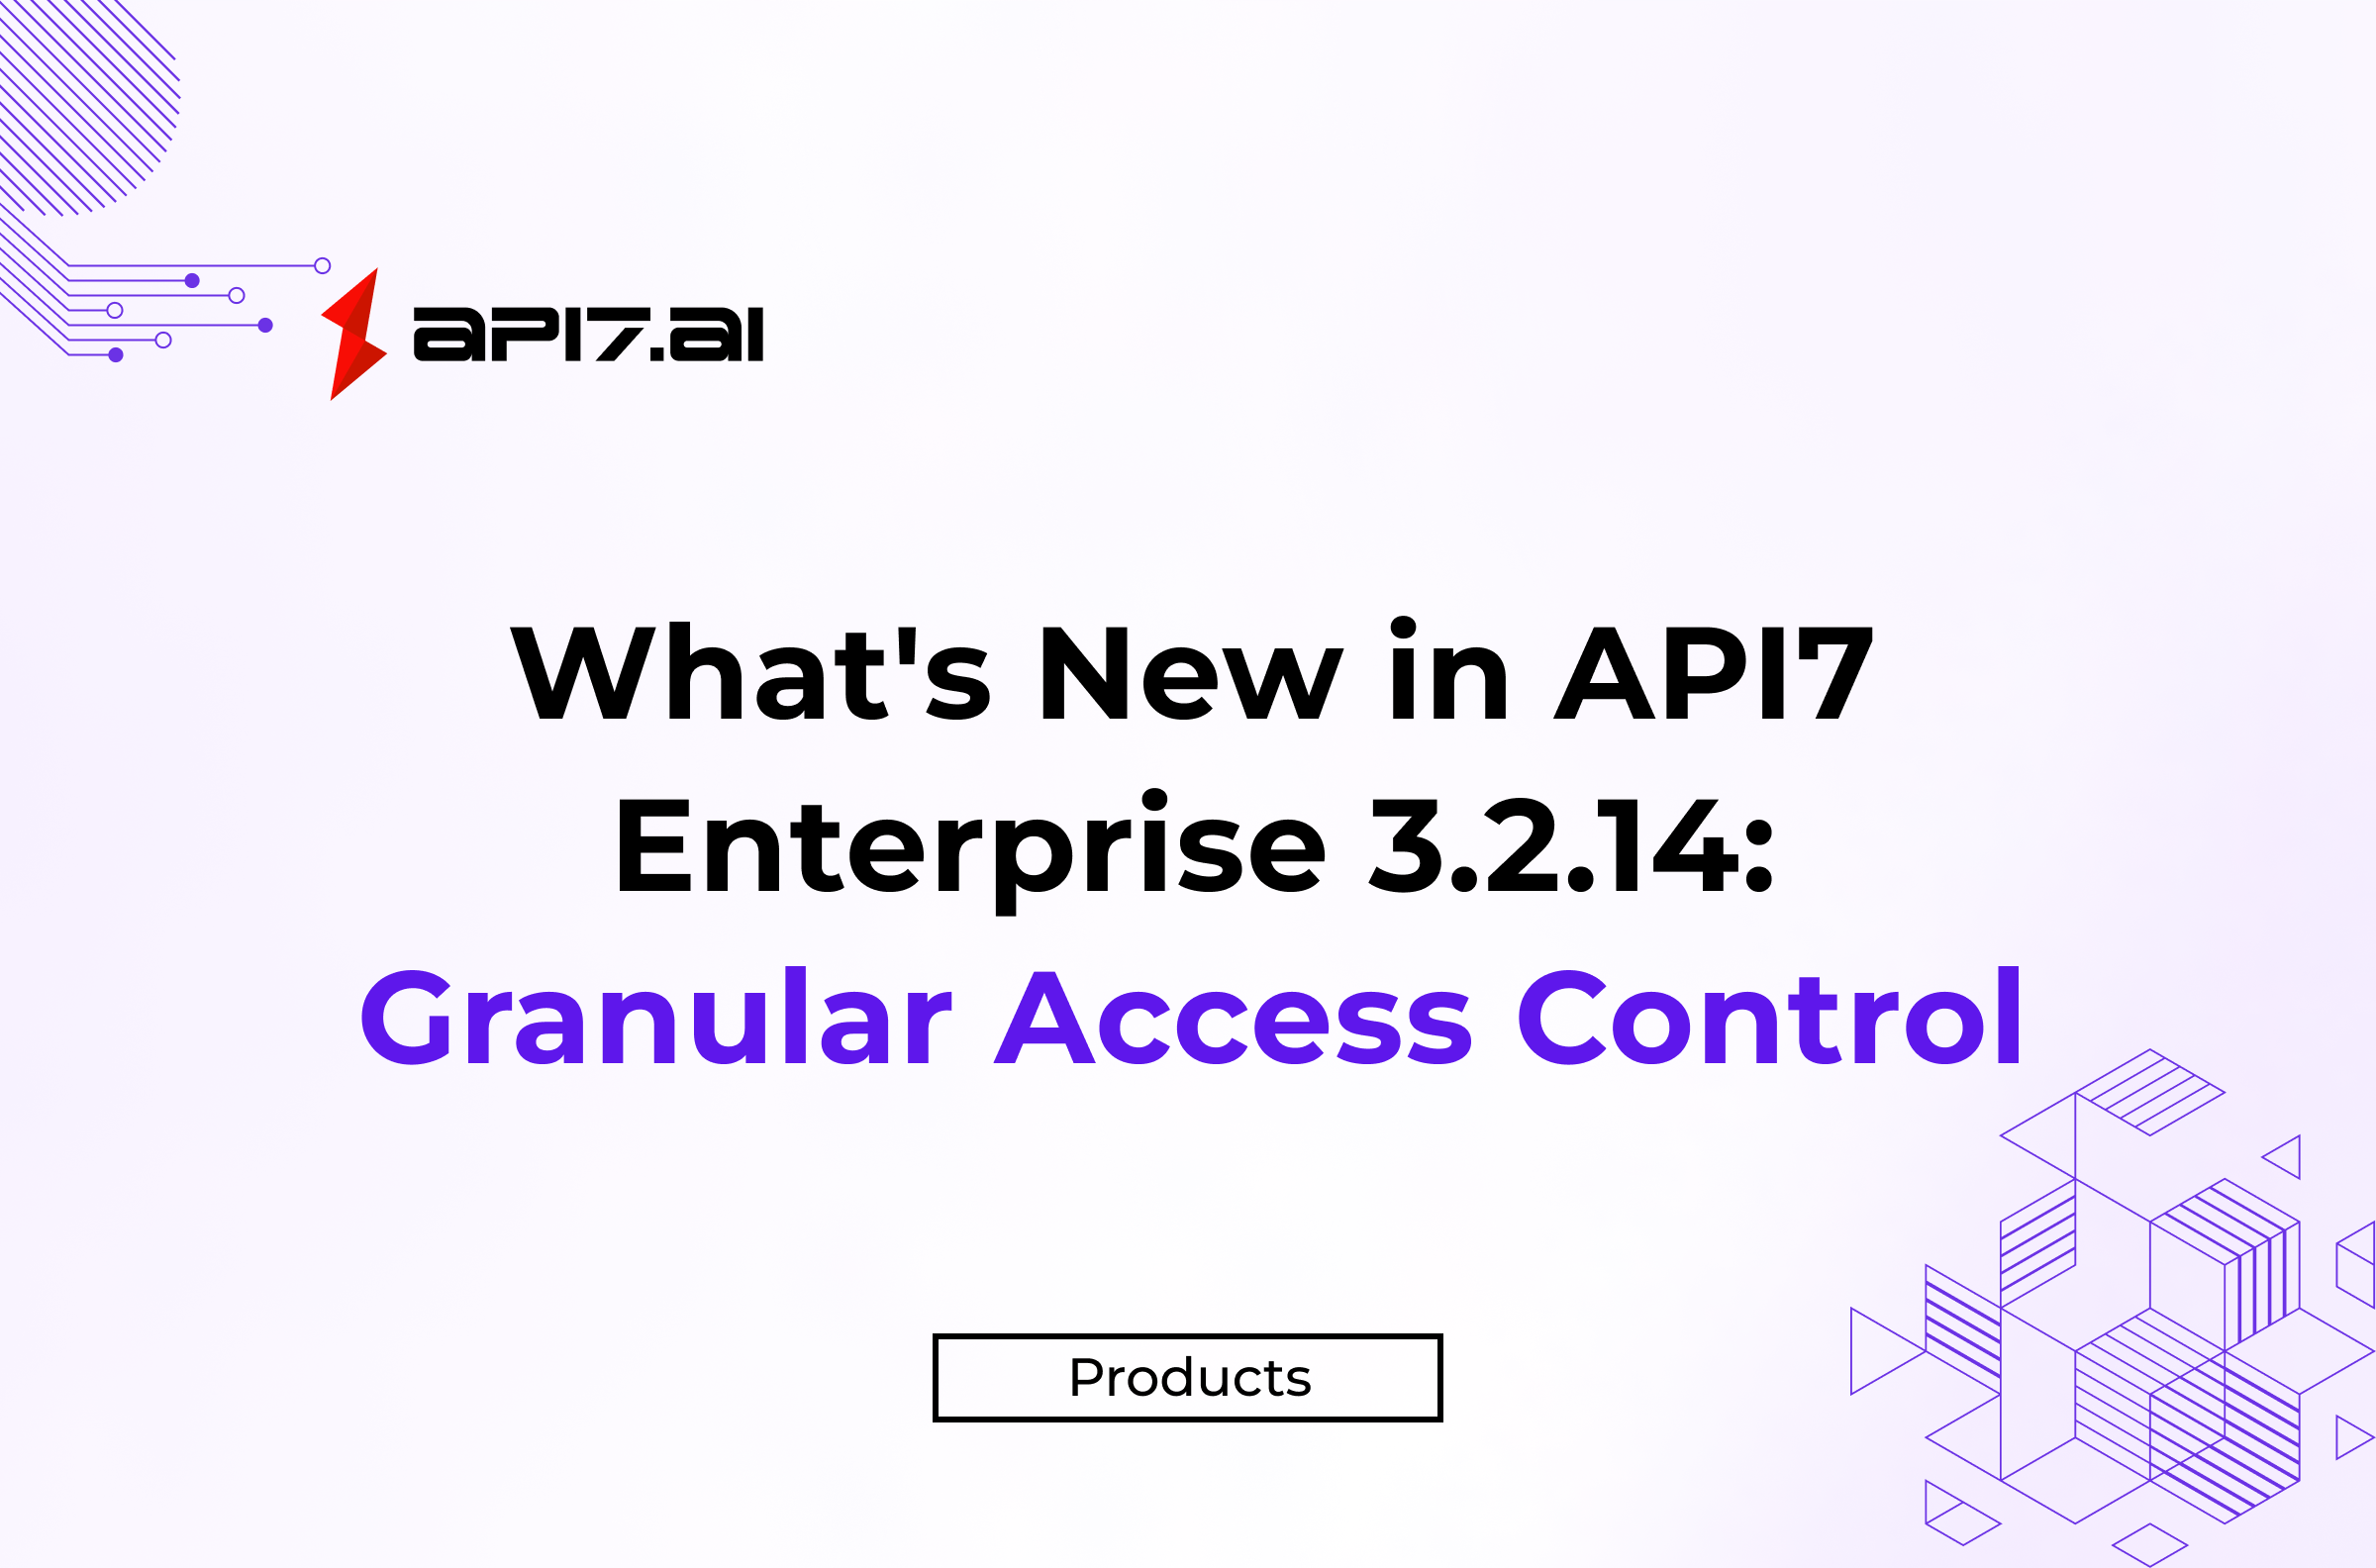 What's New in API7 Enterprise: IAM for Granular Access Control